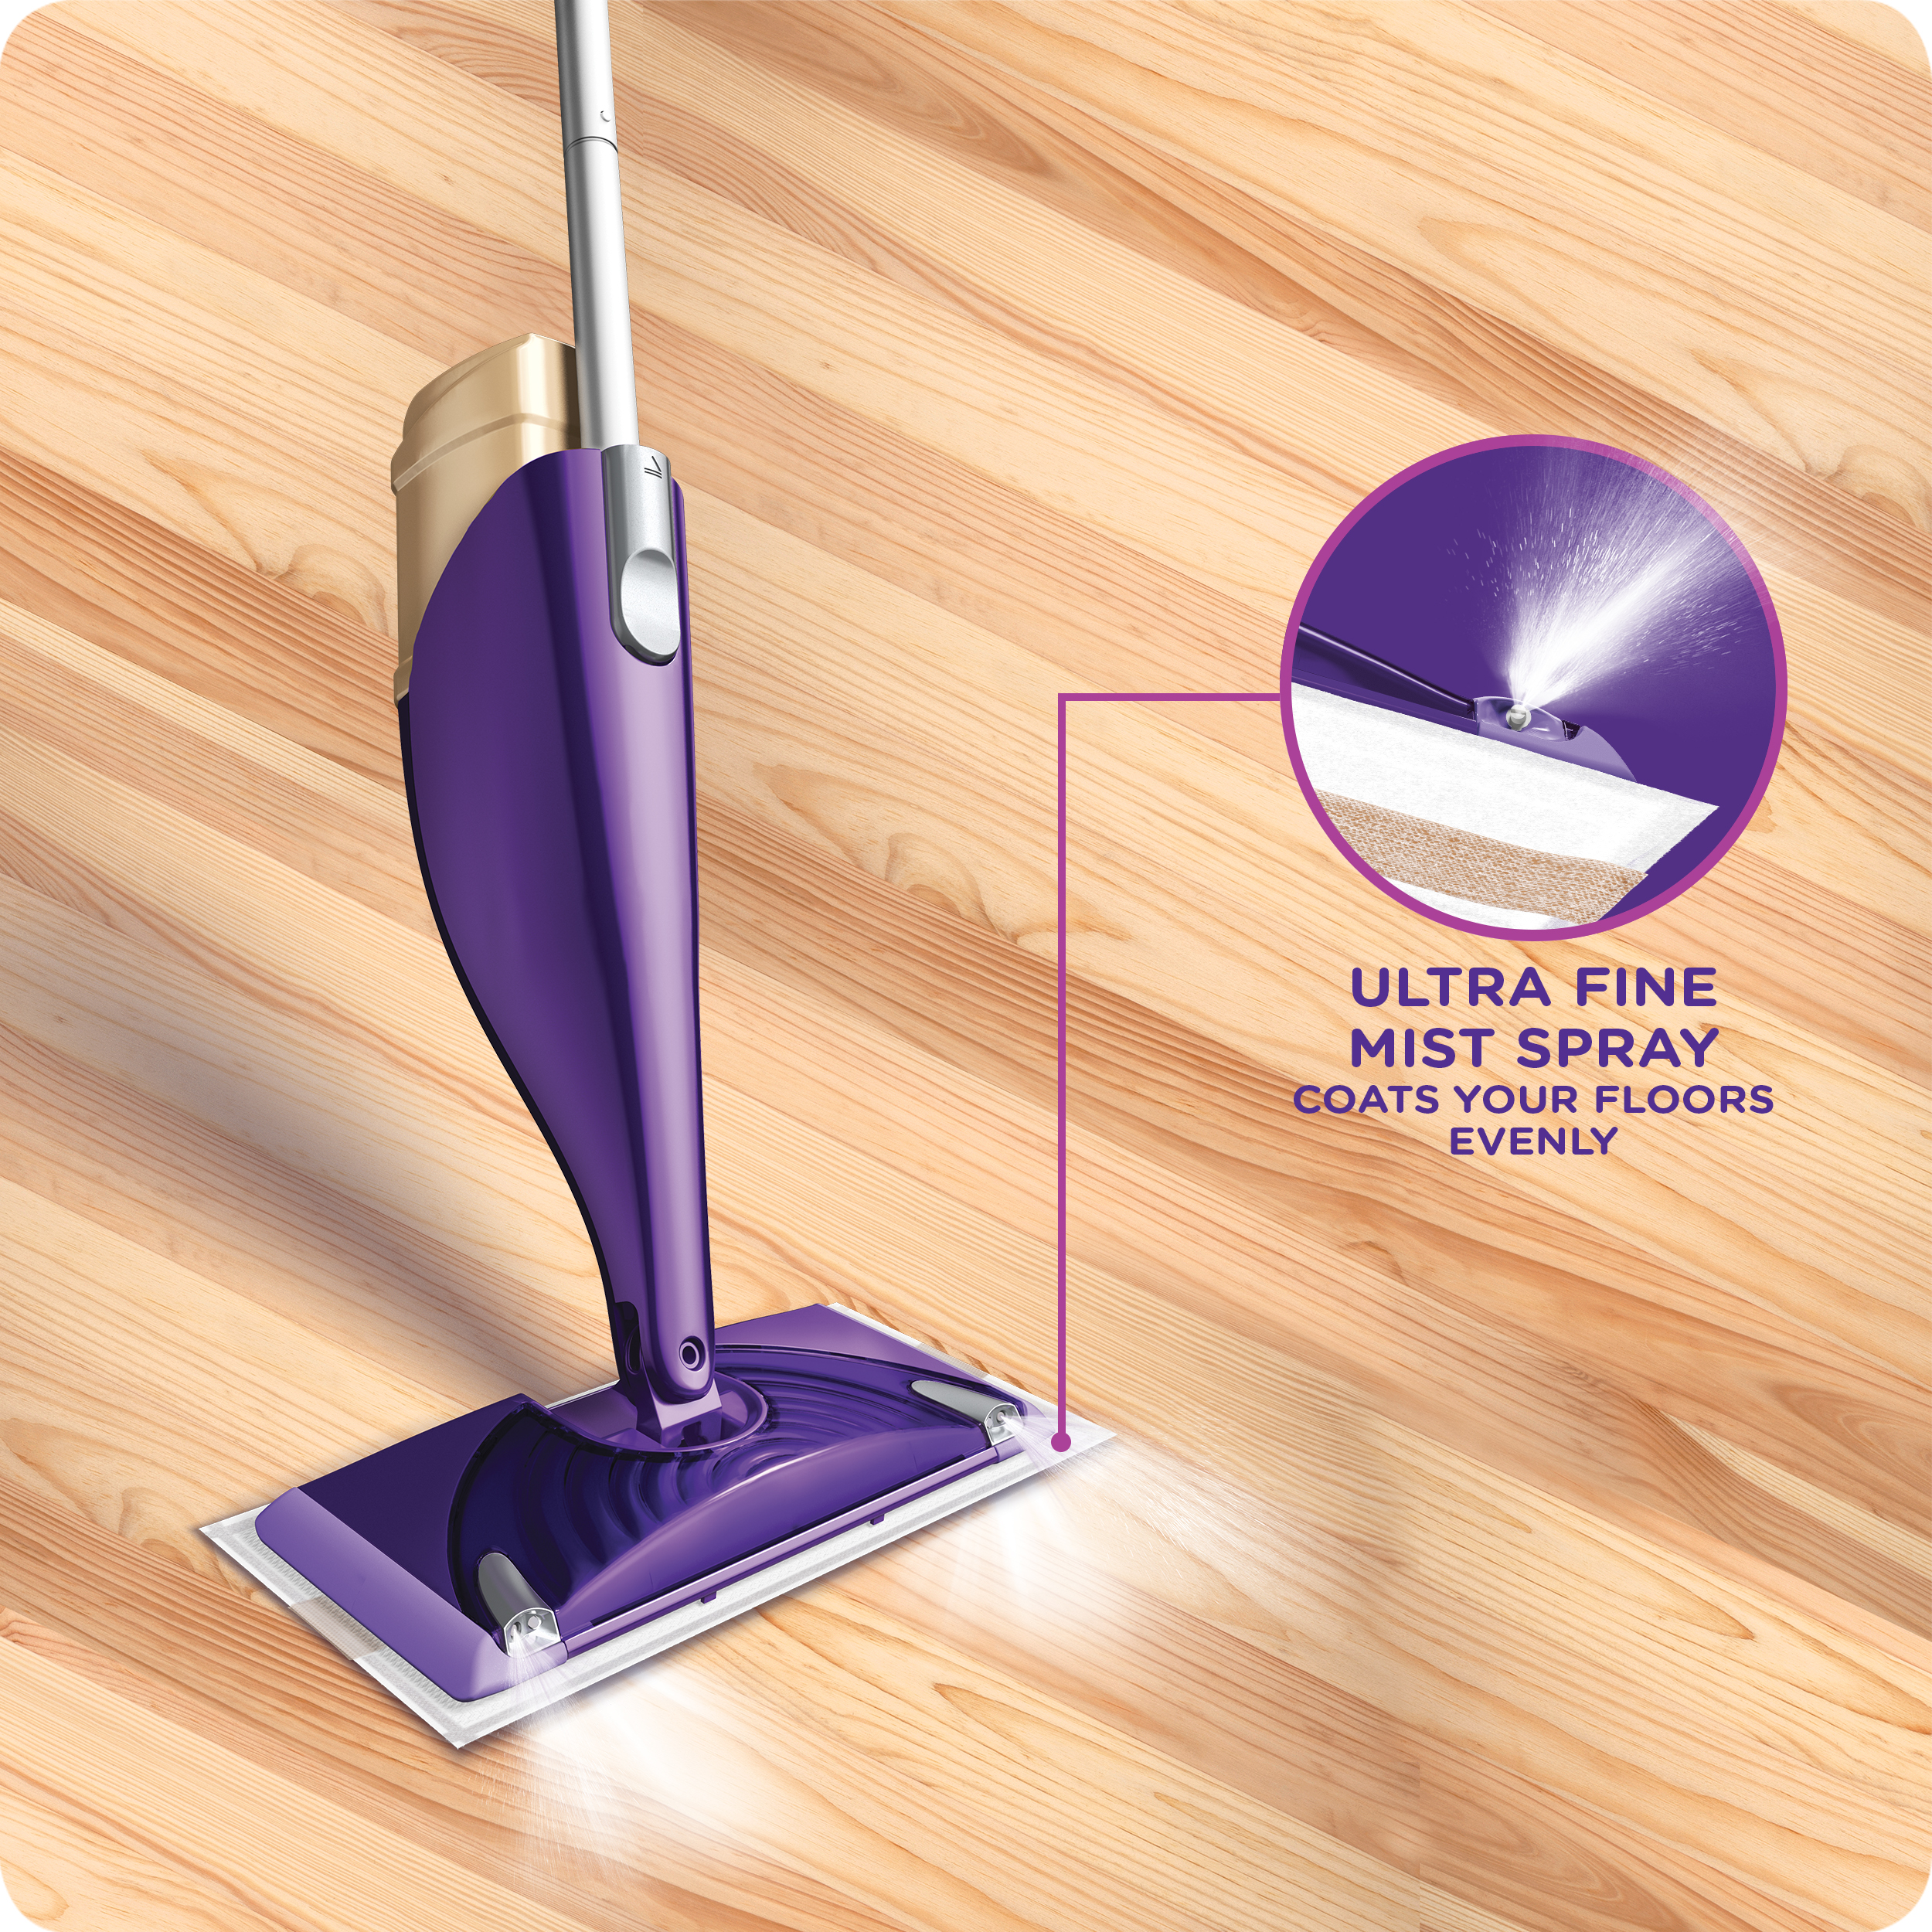 Swiffer WetJet Wood Mop Kit (1 Spray Mop, 5 Mopping Pads, 1 Cleaning Solution) - image 5 of 12